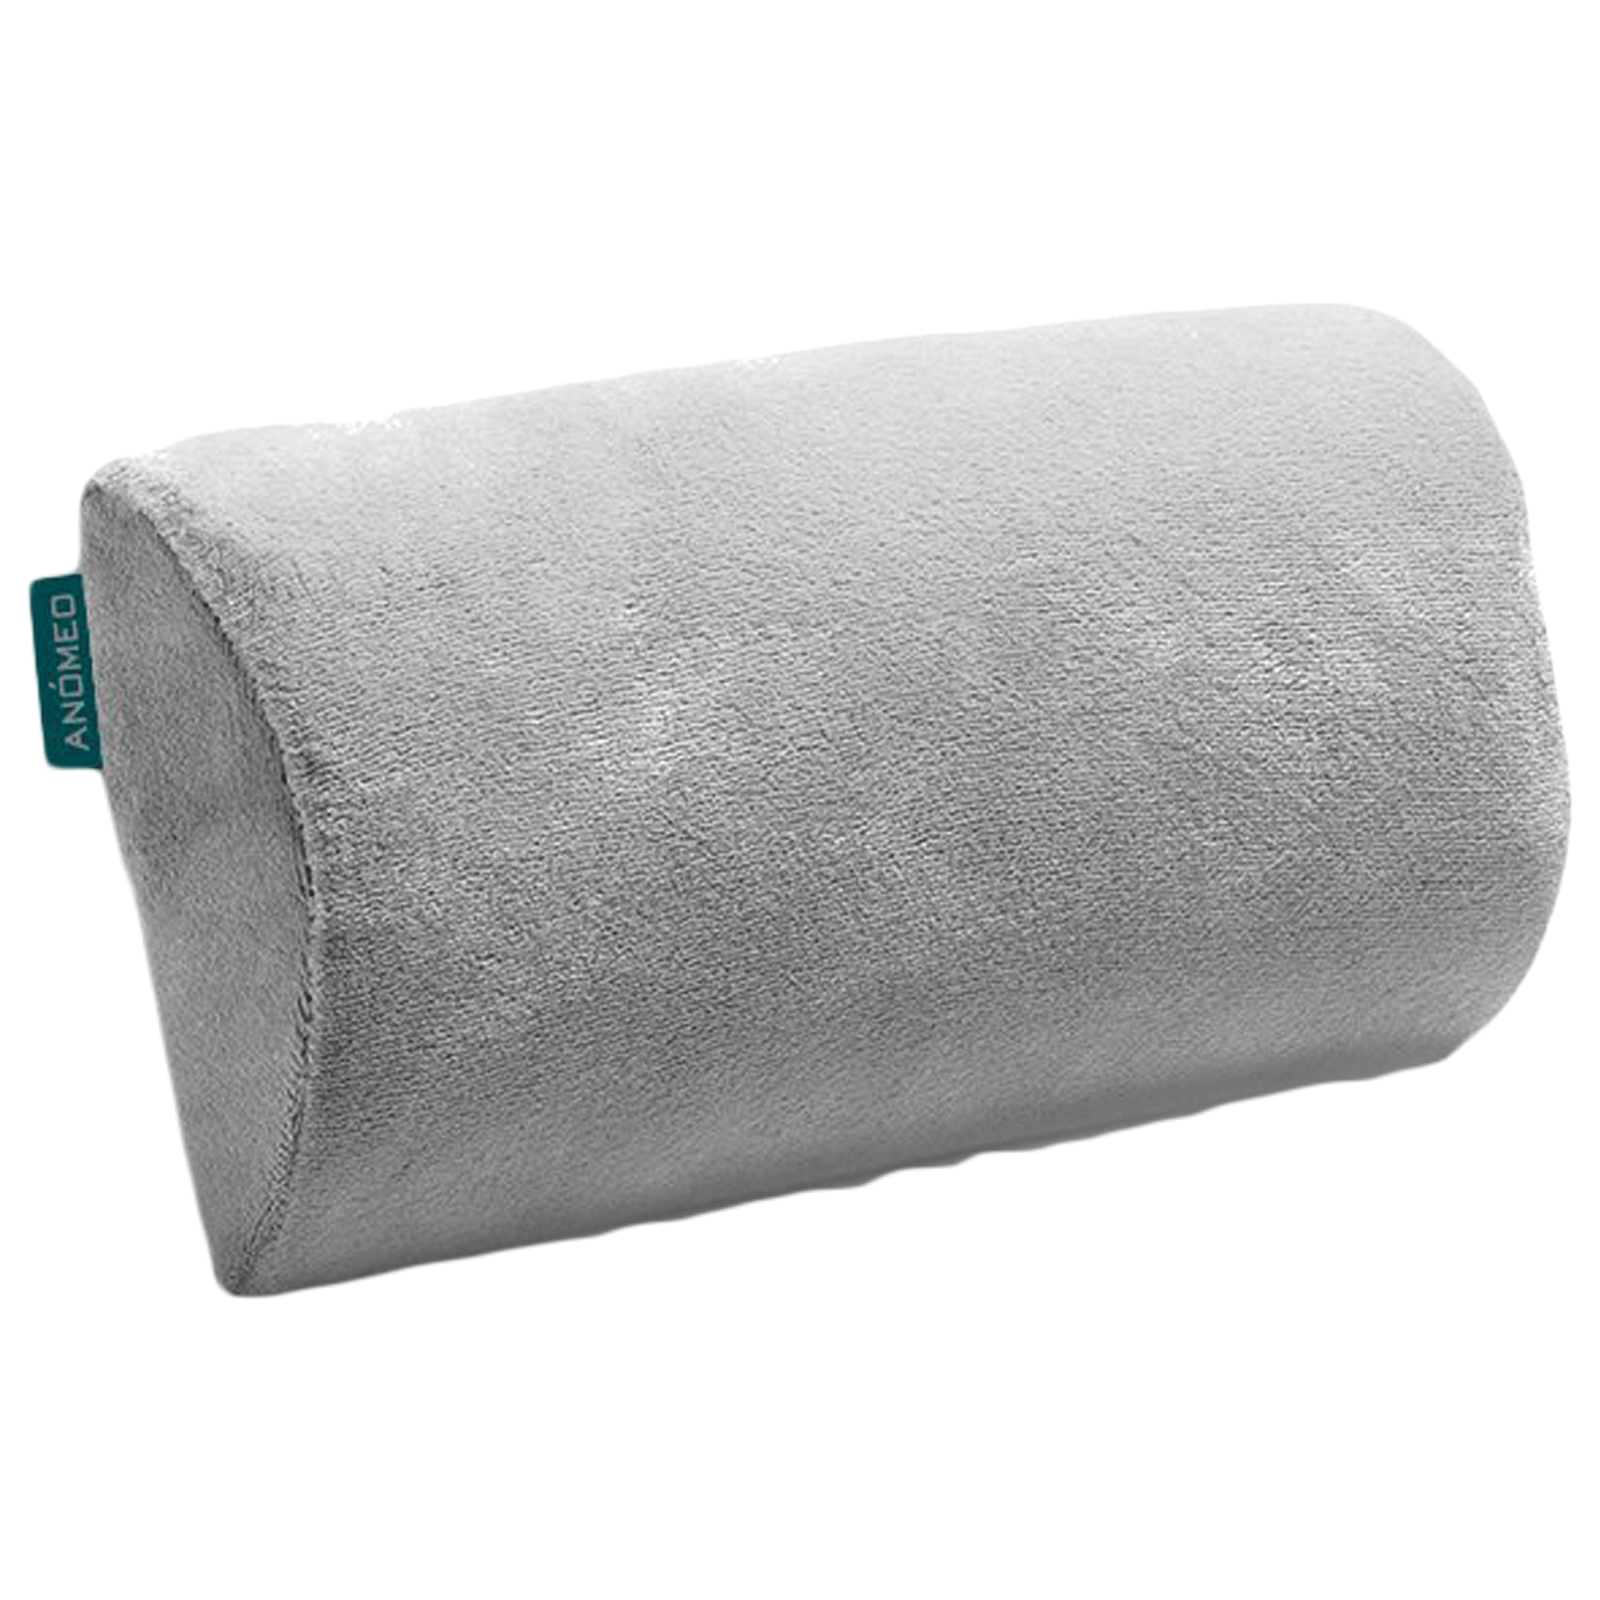 ANOMEO Half Cylinder Memory Foam Neck Pillow (Hypoallergenic and Relieves Neck Pain, 2407, Grey)